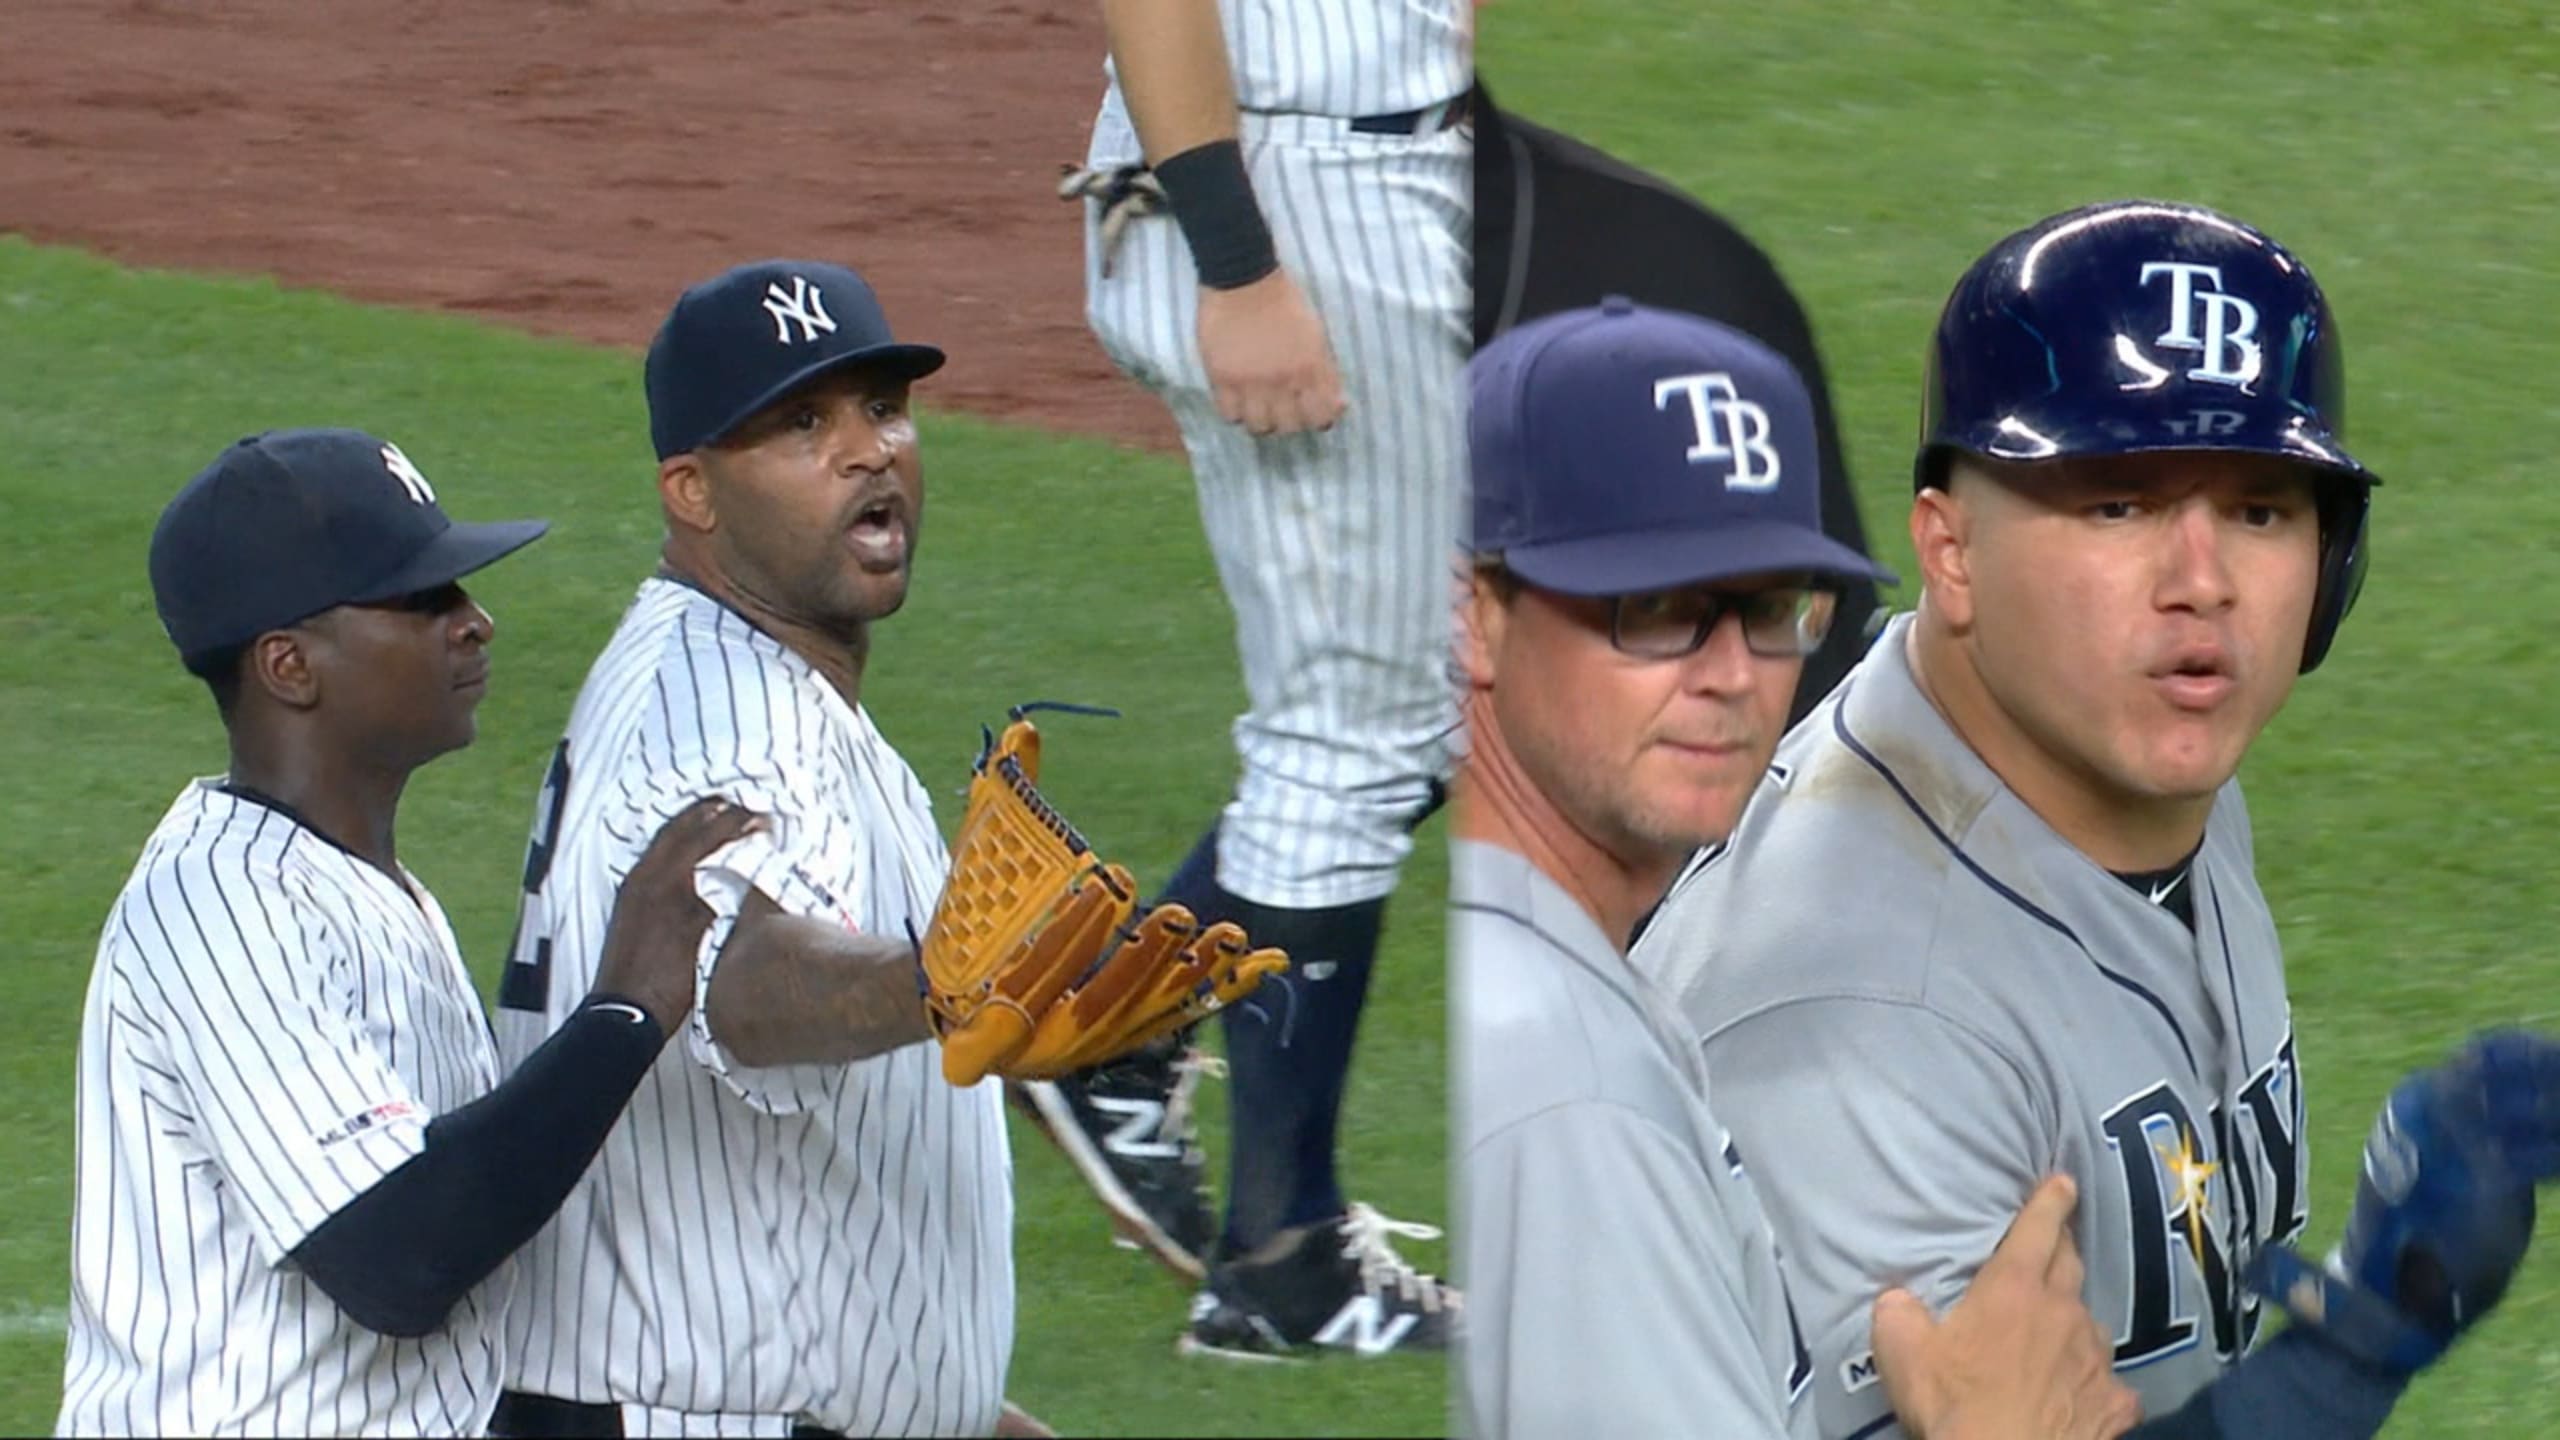 Yankees' Sabathia appeals 5-game ban for hitting Rays' Sucre with pitch